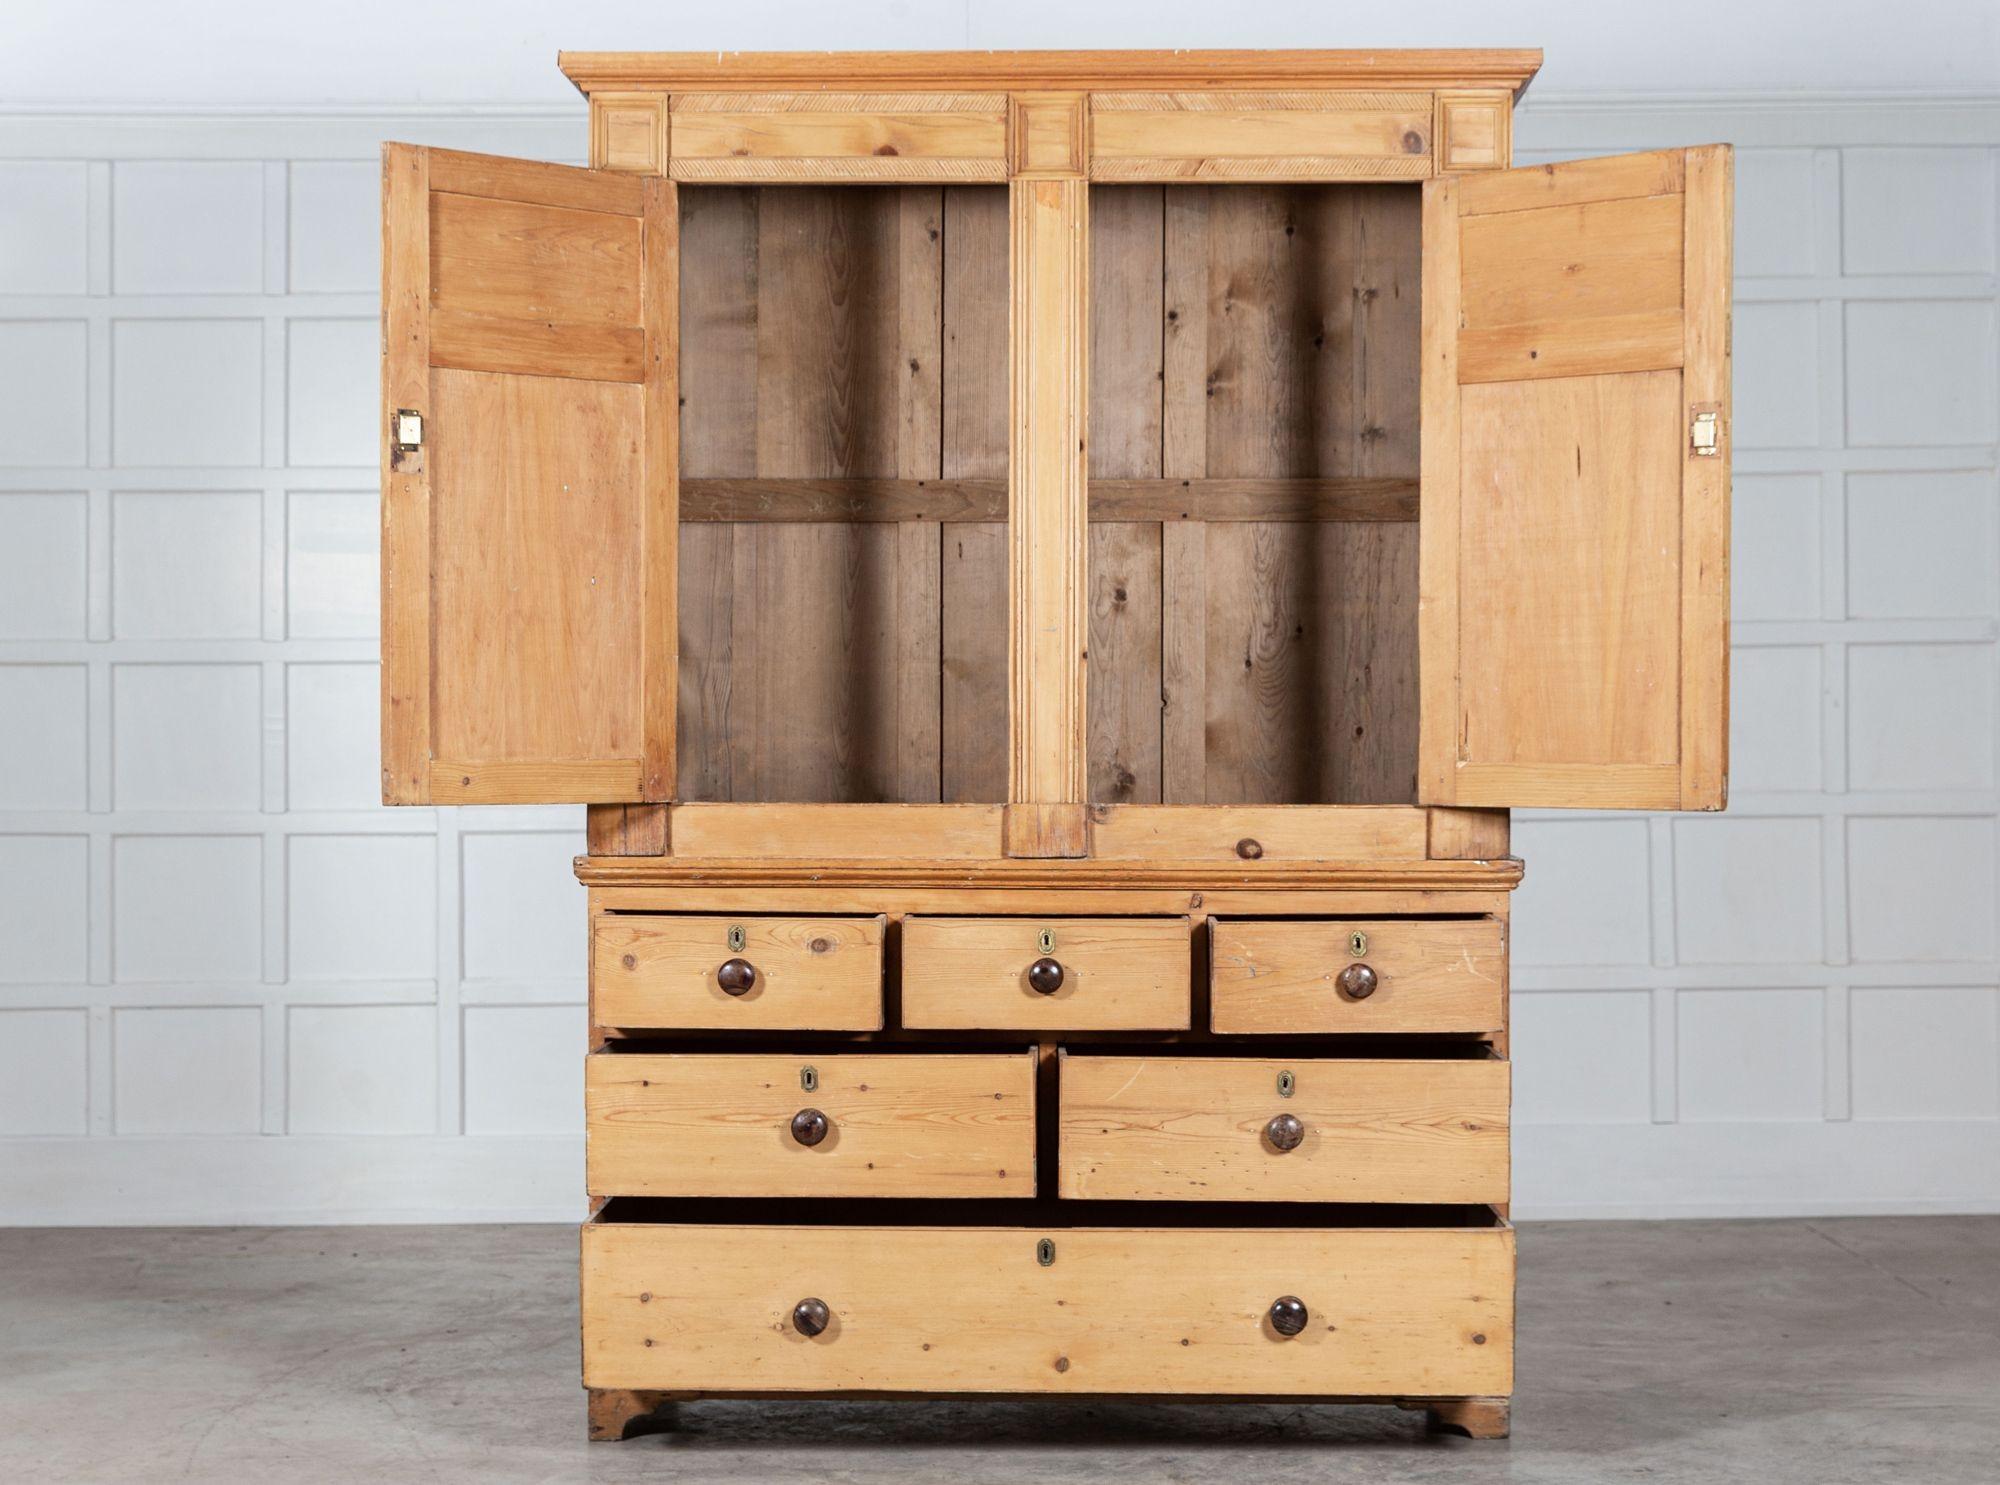 circa 1820
Large Regency English estate made pine housekeepers cupboard
(RHS bracket foot will be restored. Rail or shelves can be added)
sku 1334
We can also customise existing pieces to suit your scheme/requirements. We have our own workshop,